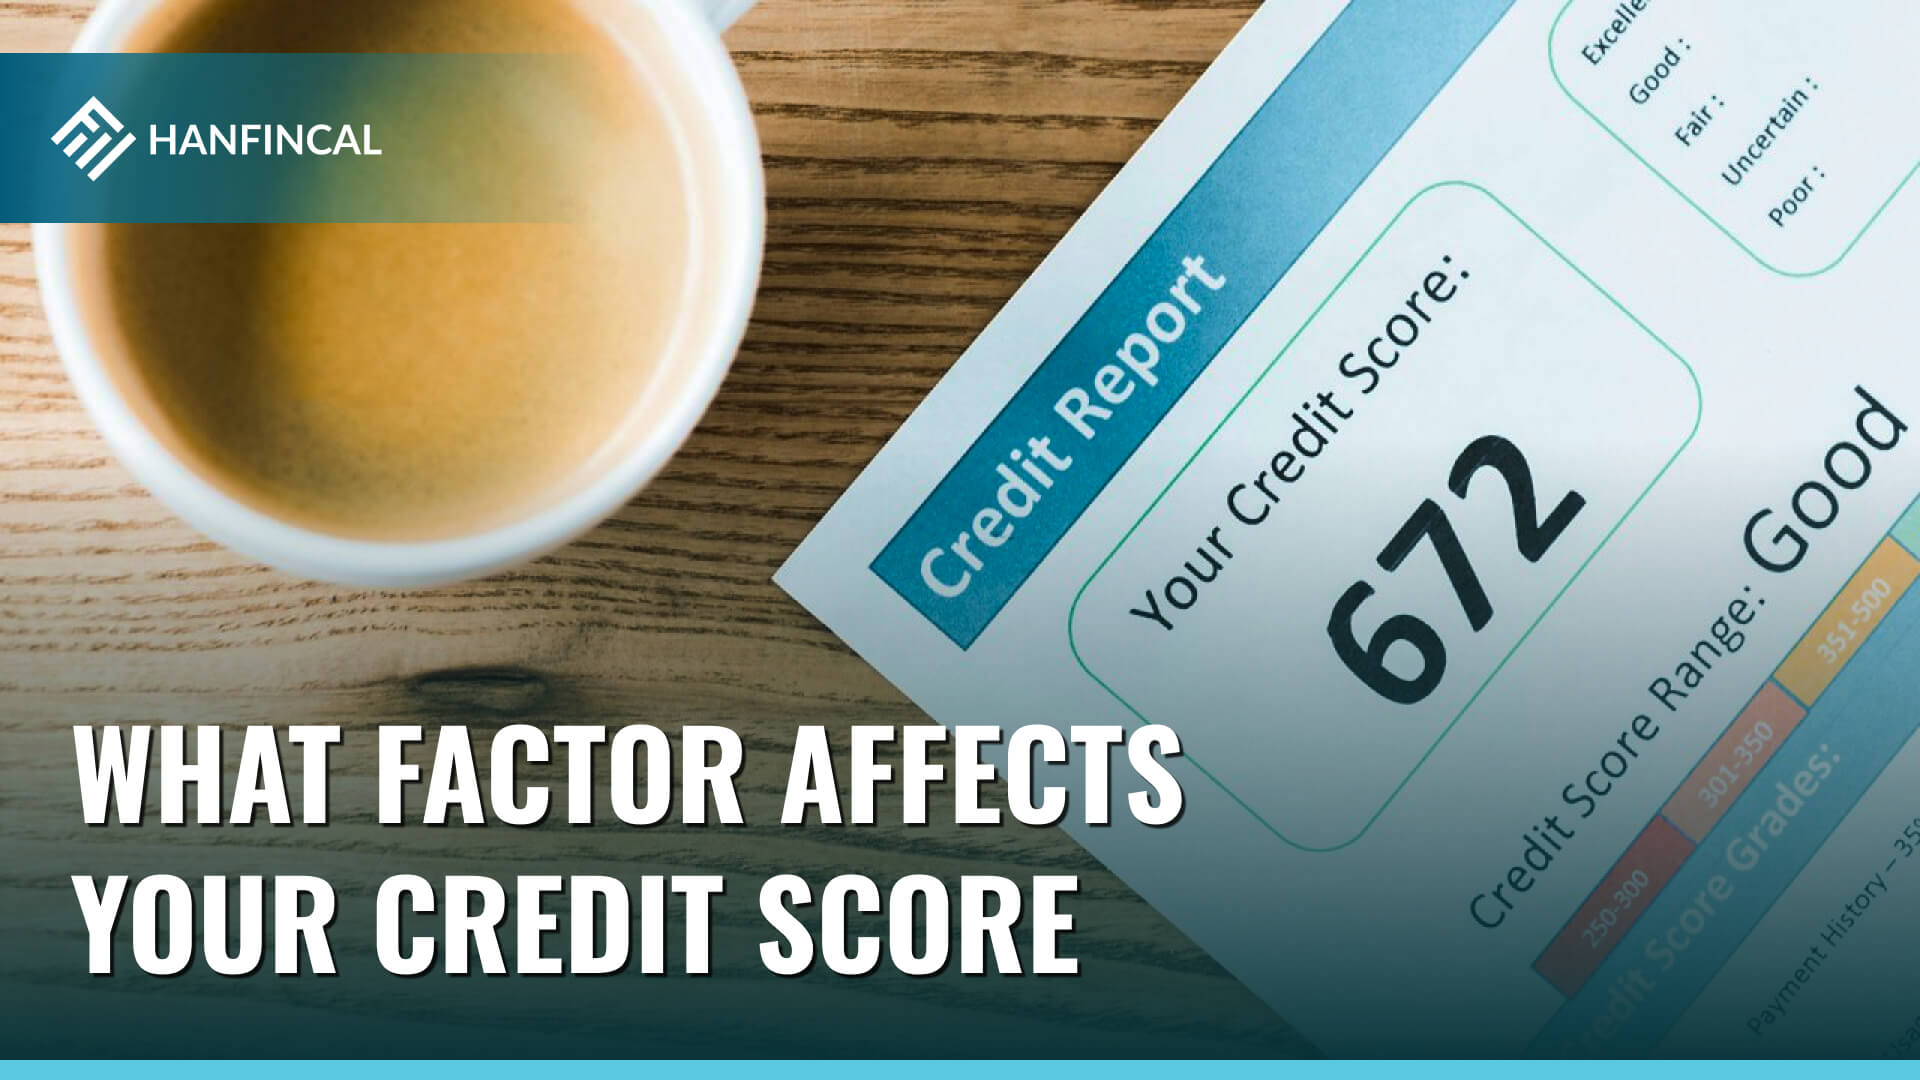 What factor affects your credit score?